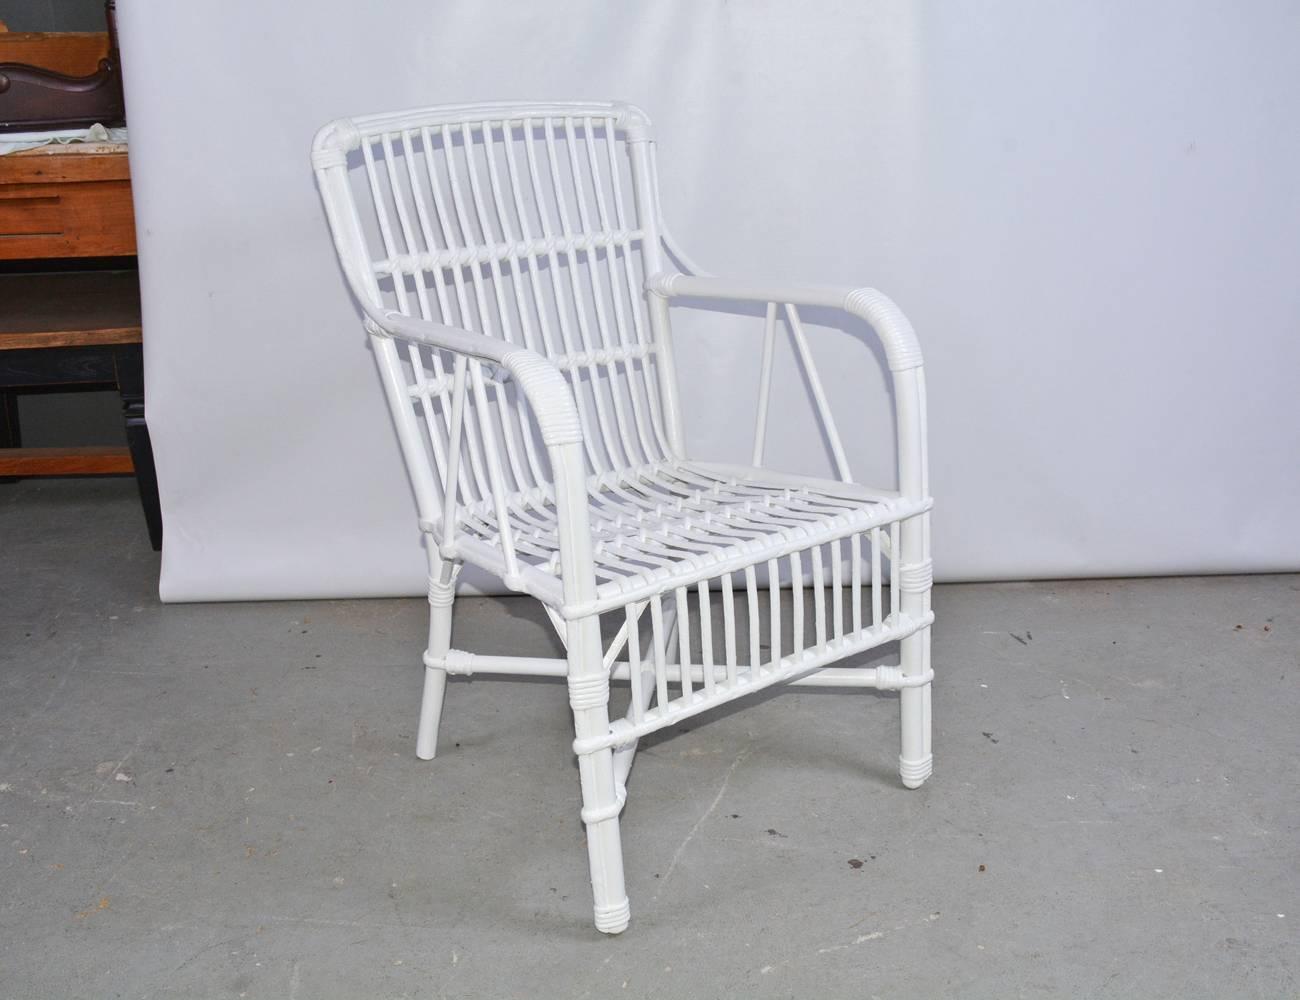 The vintage porch armchair is made of rattan and is newly painted glossy white. The legs have criss-cross stretchers and a rattan apron between the front legs. The construction is solid. Ready to include the cushions of your choice.

Arm: 26